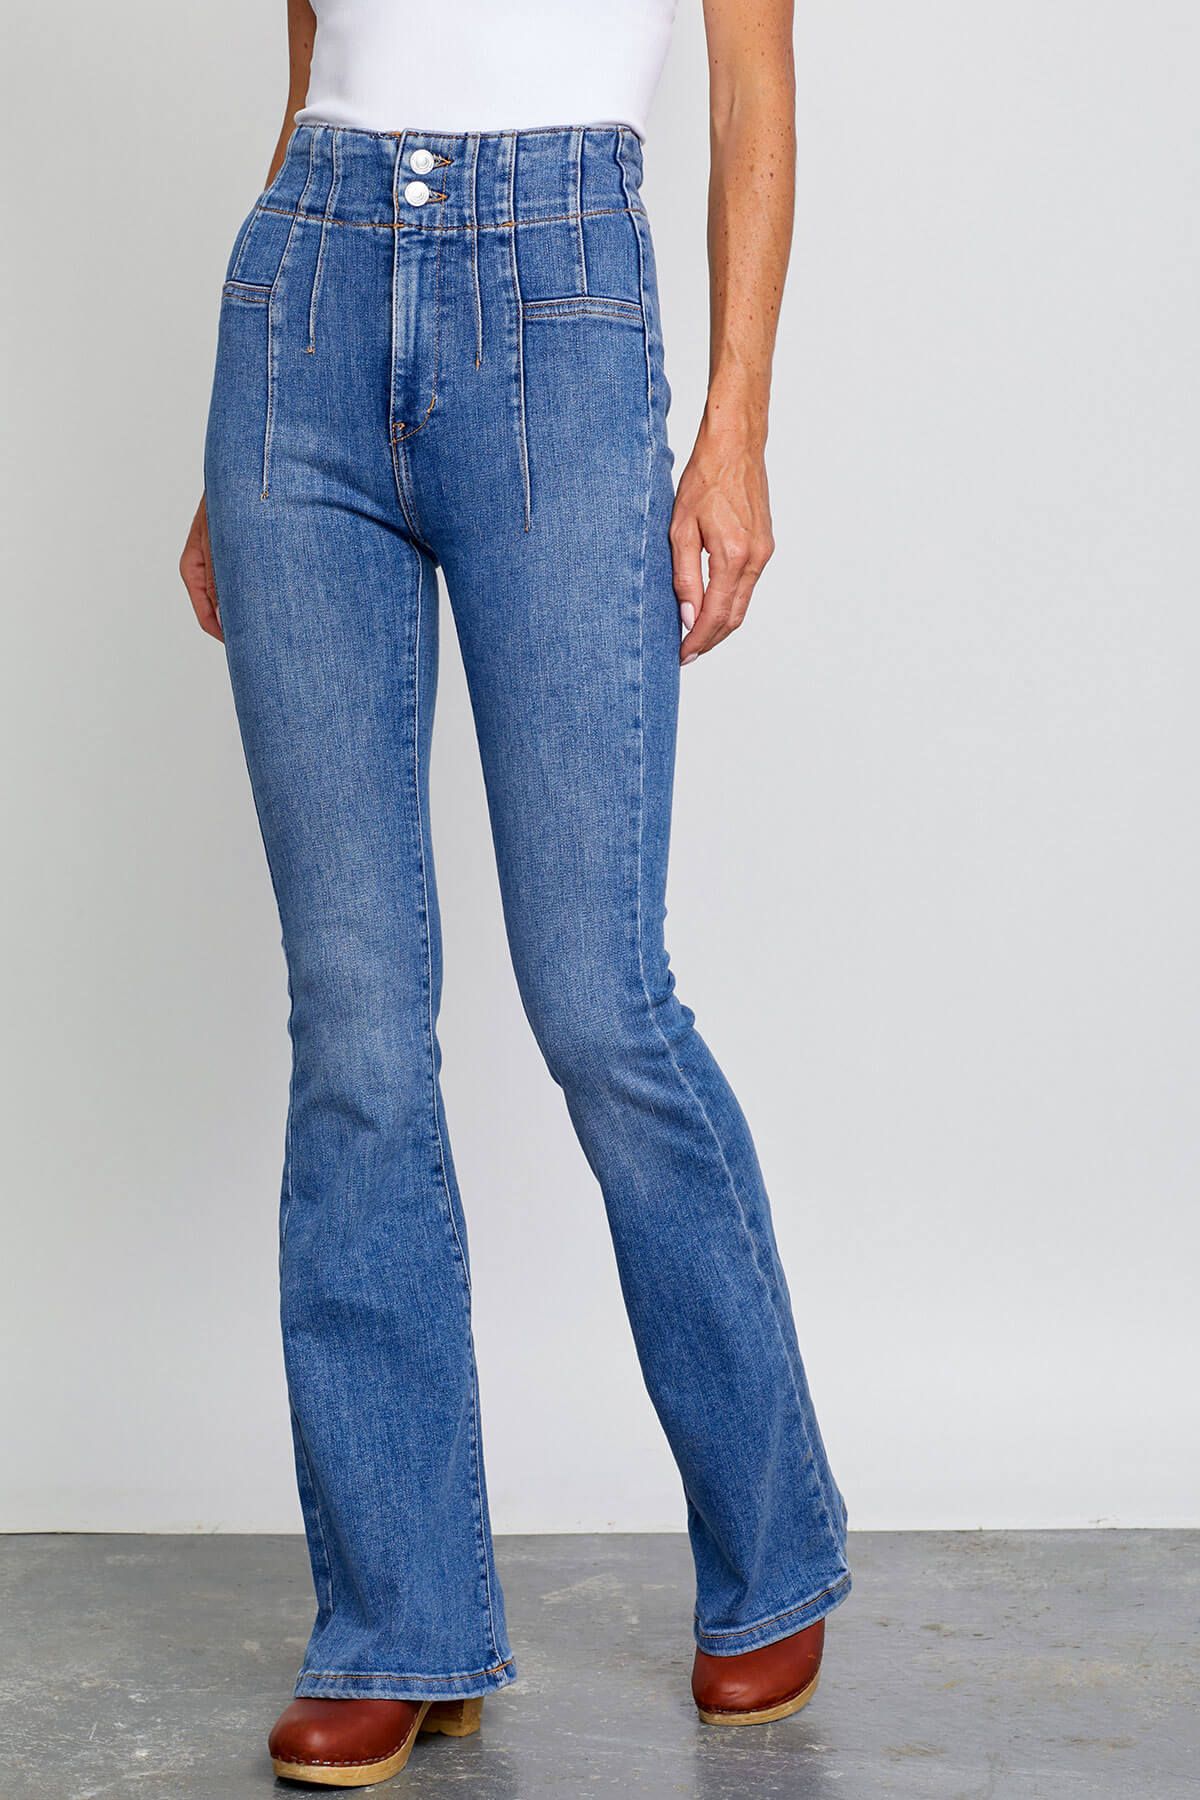 Free People Jayde Flare Jeans | Social Threads